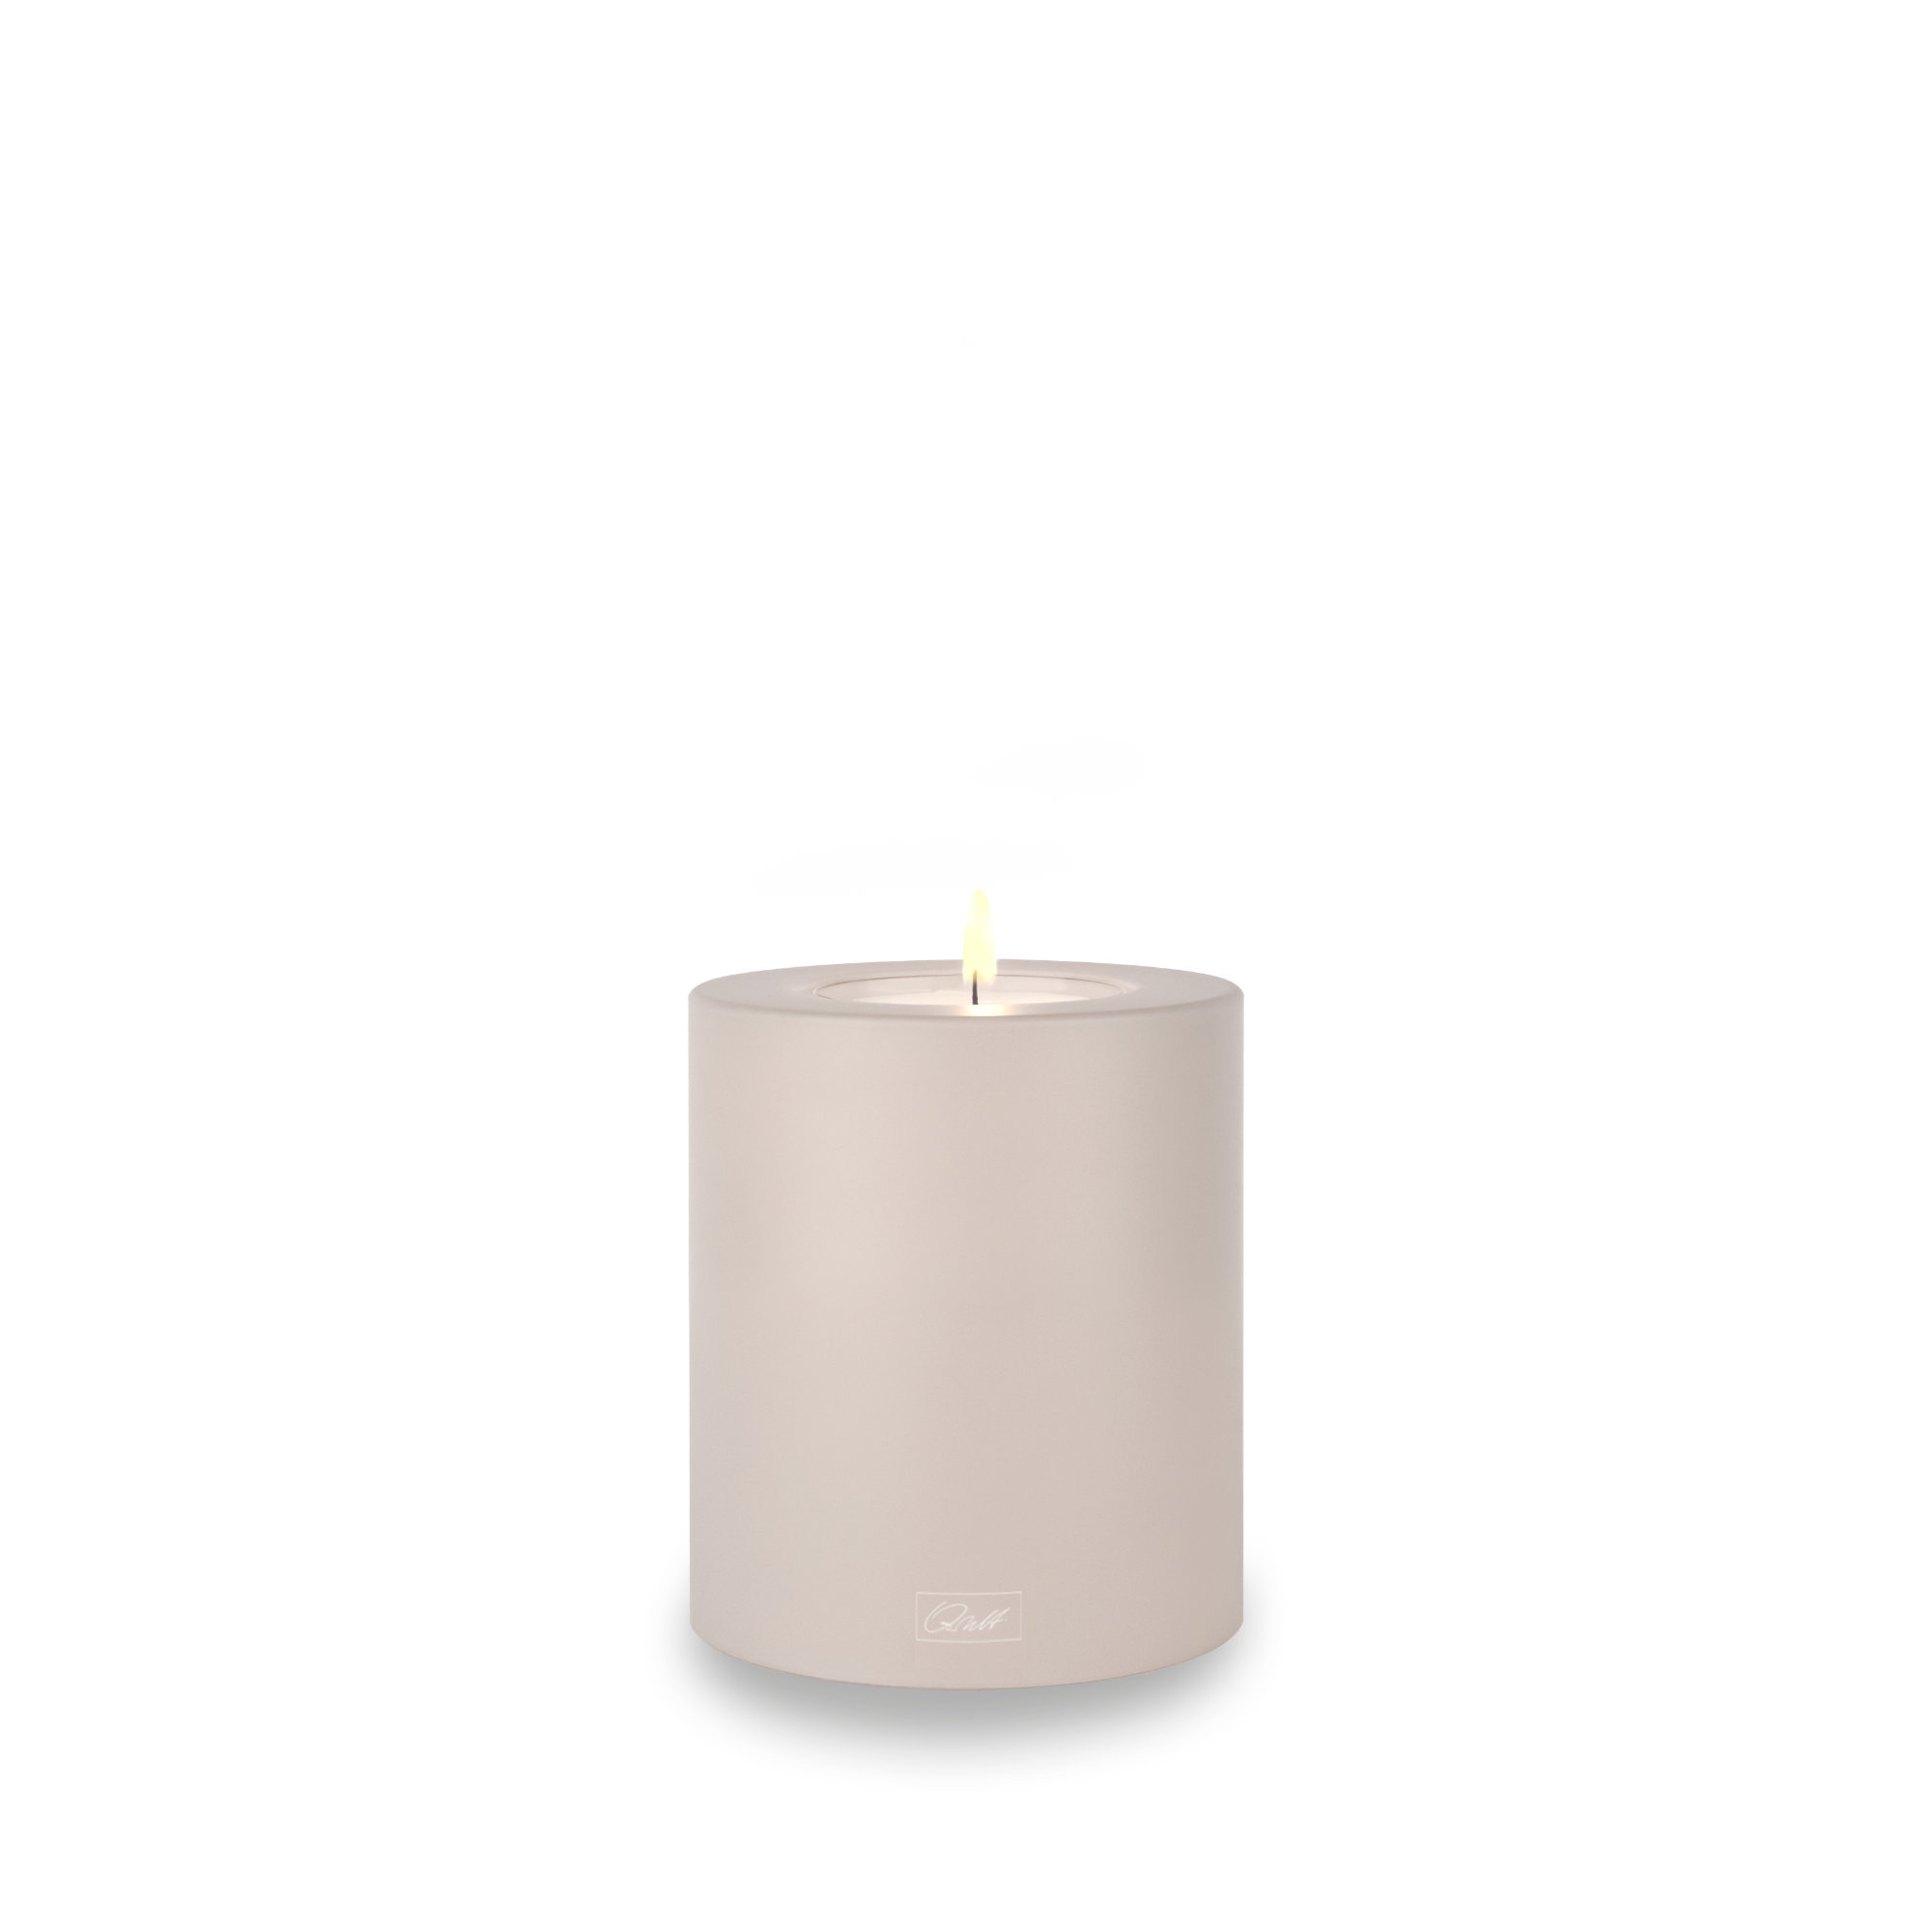 Qult Farluce Trend - Tealight Candle Holder - cappuccino